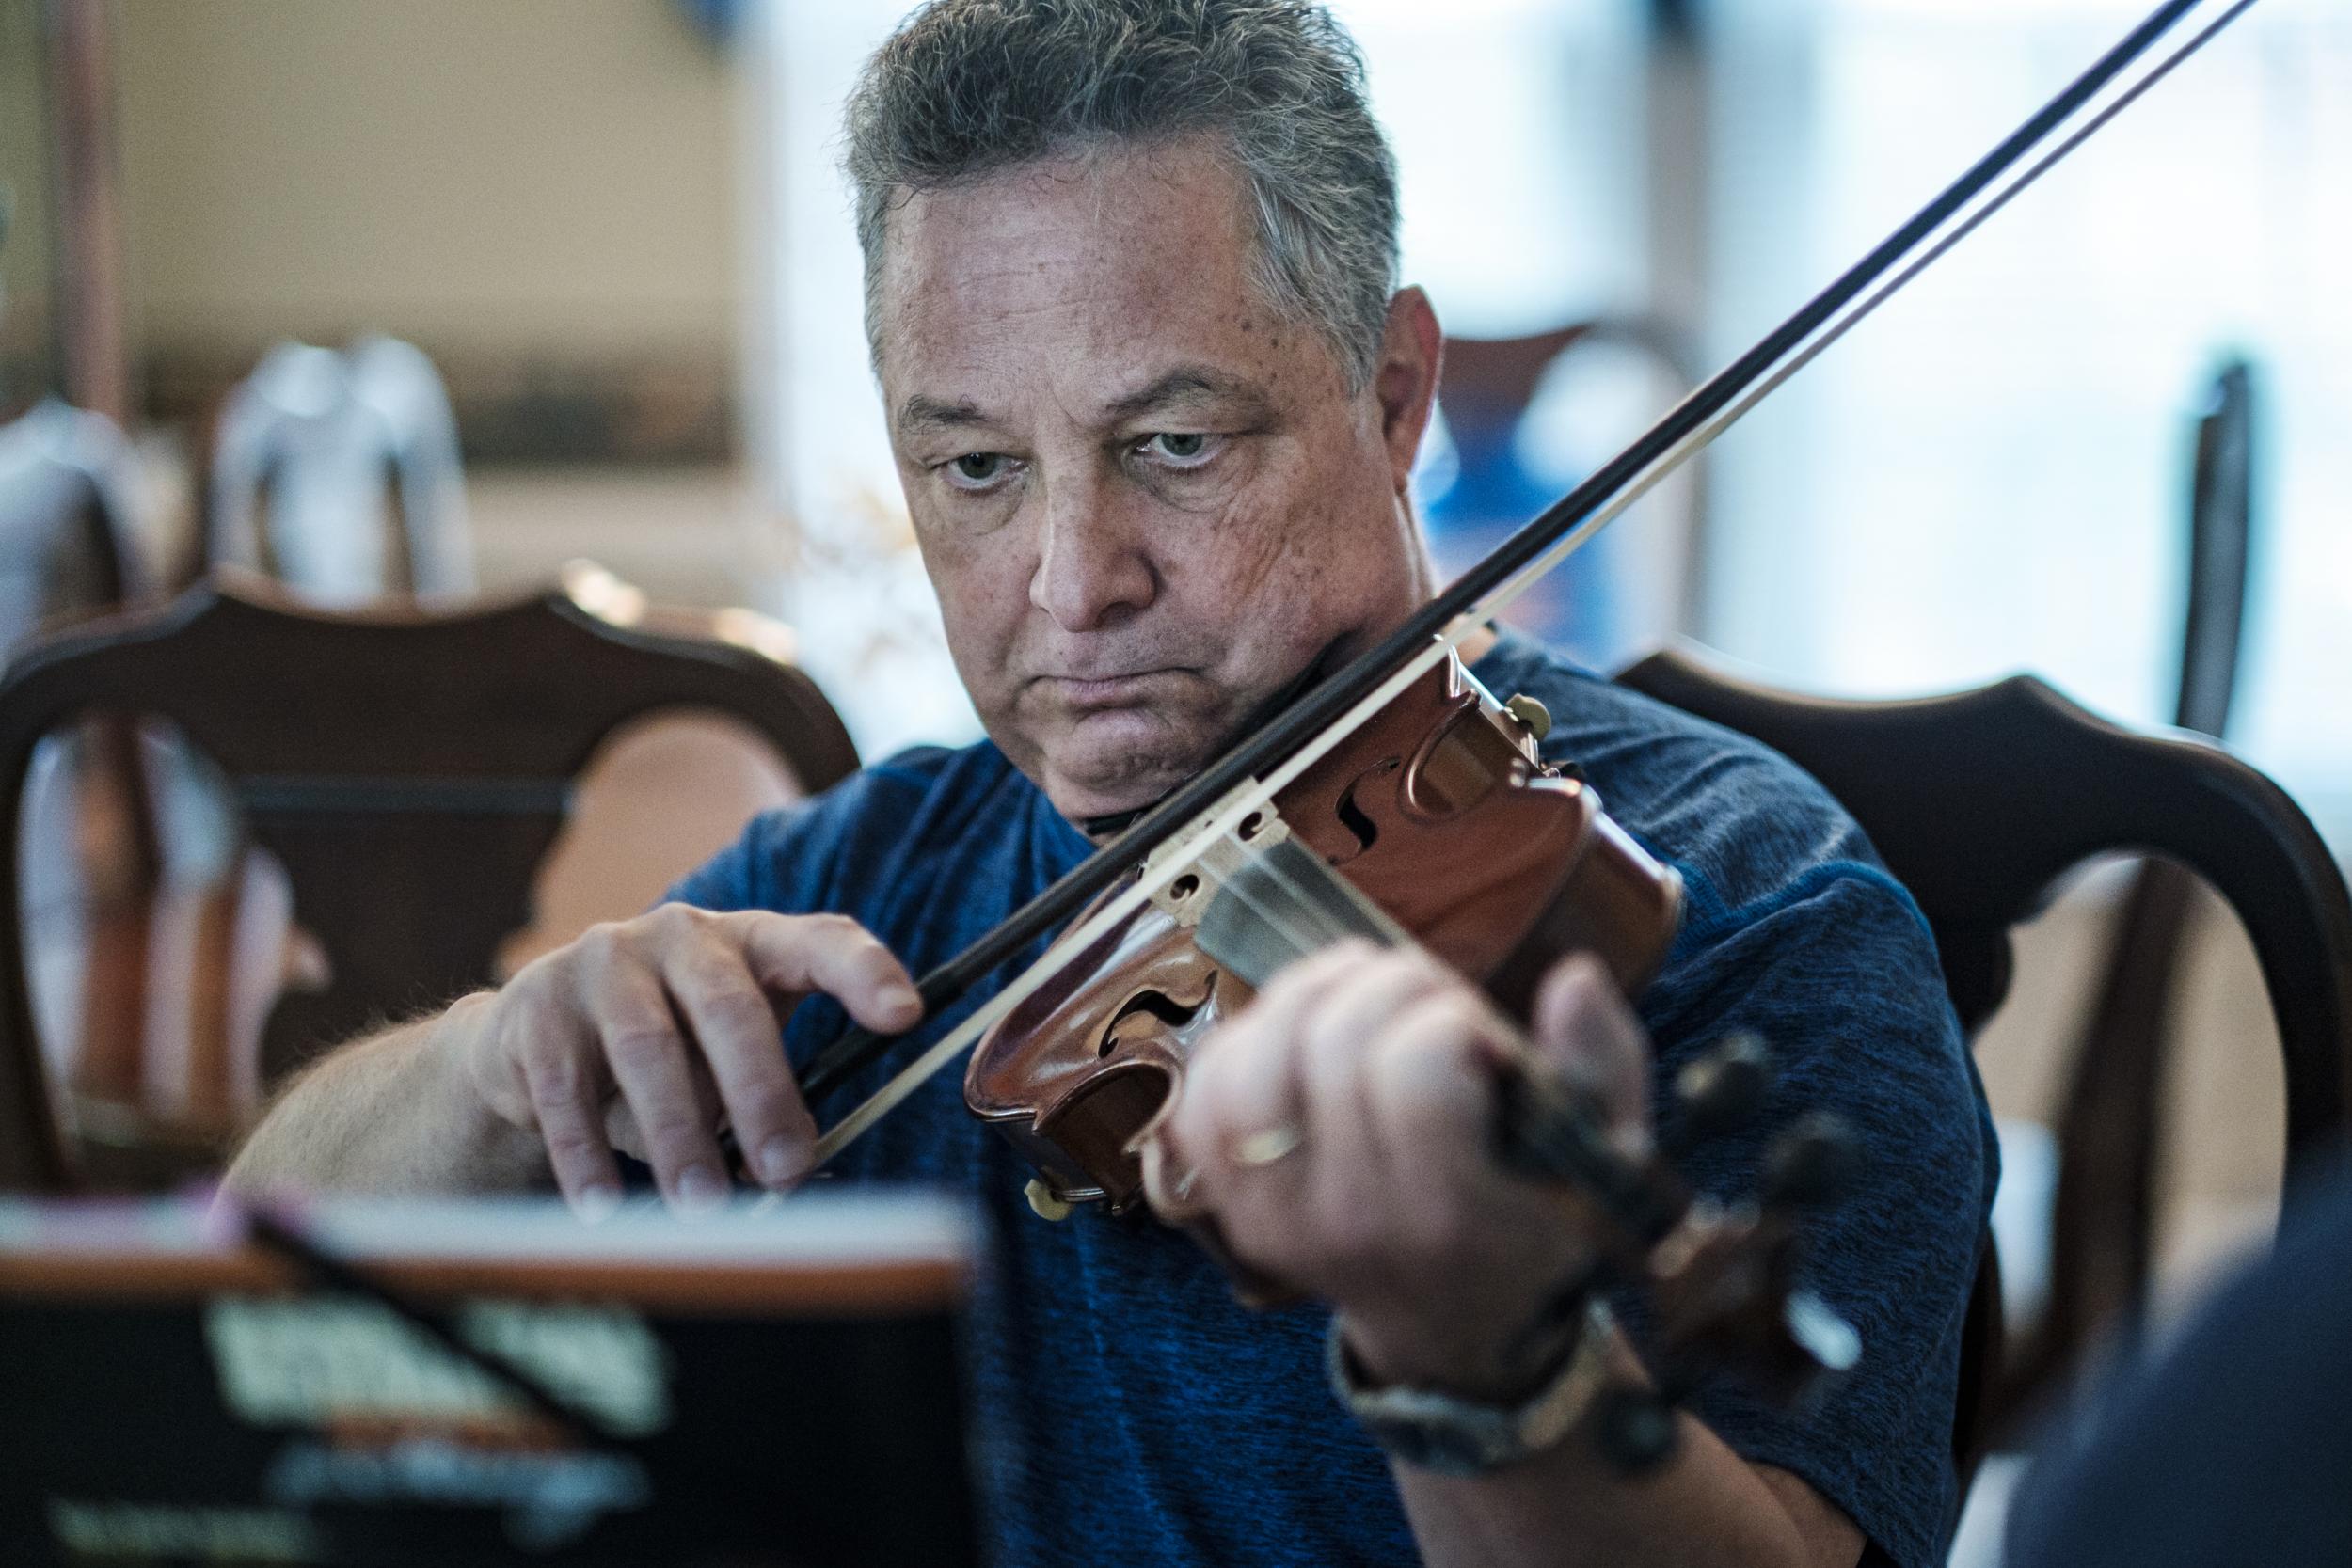 Tom plays the violin for his wife in their Virginia home (Pete Marovich/The Washington Post)